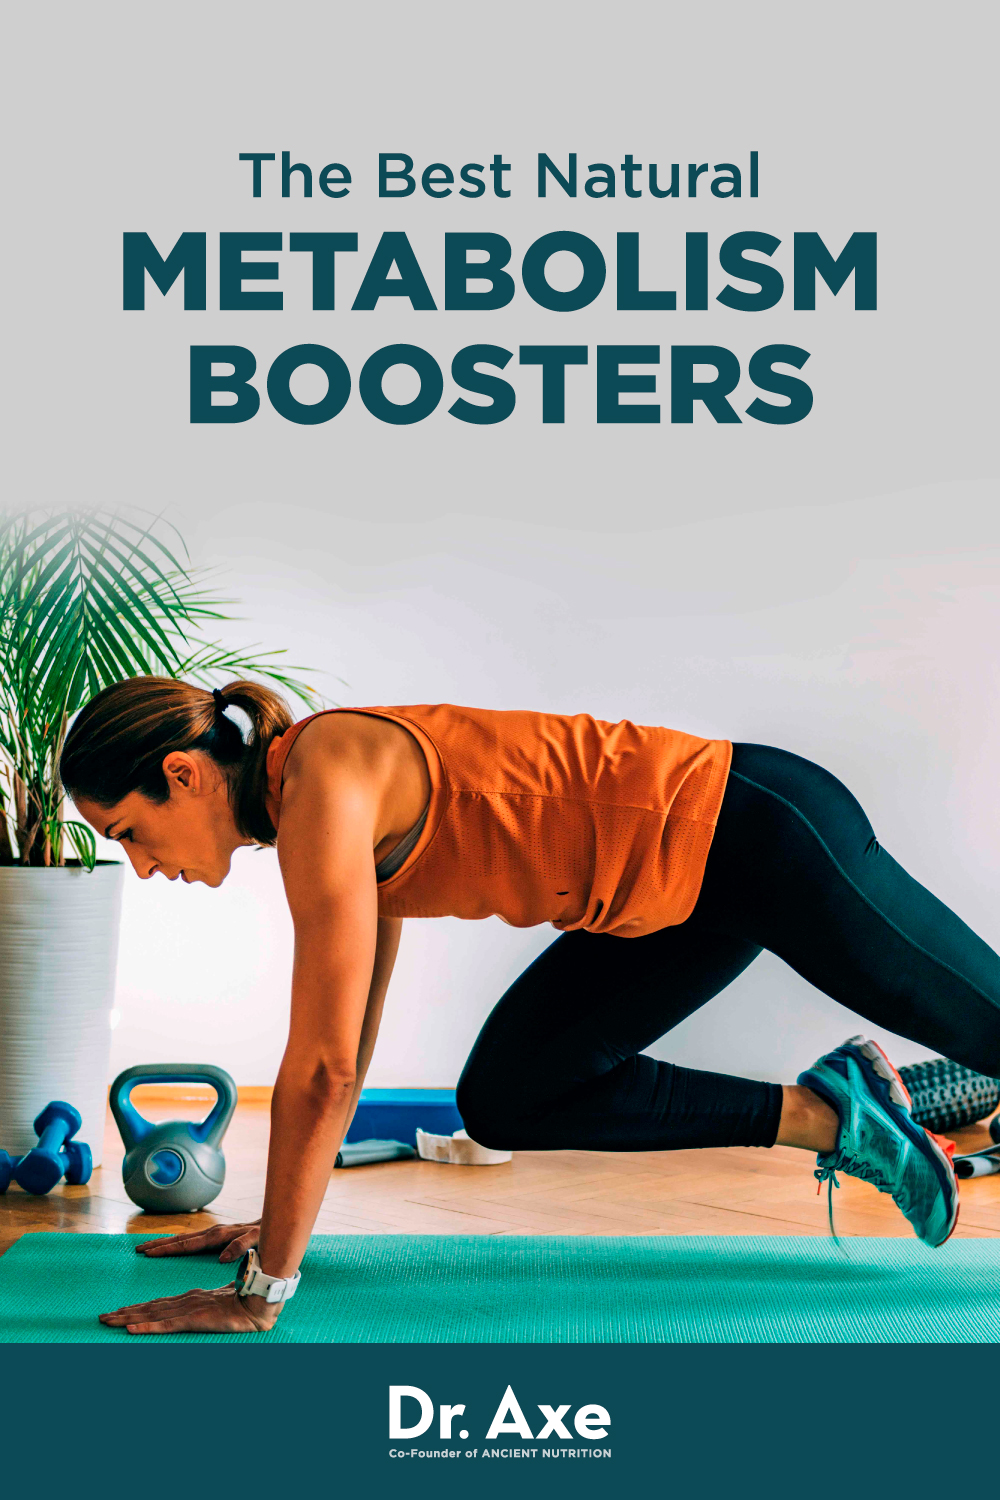 Metabolism boosters - Dr. Axe